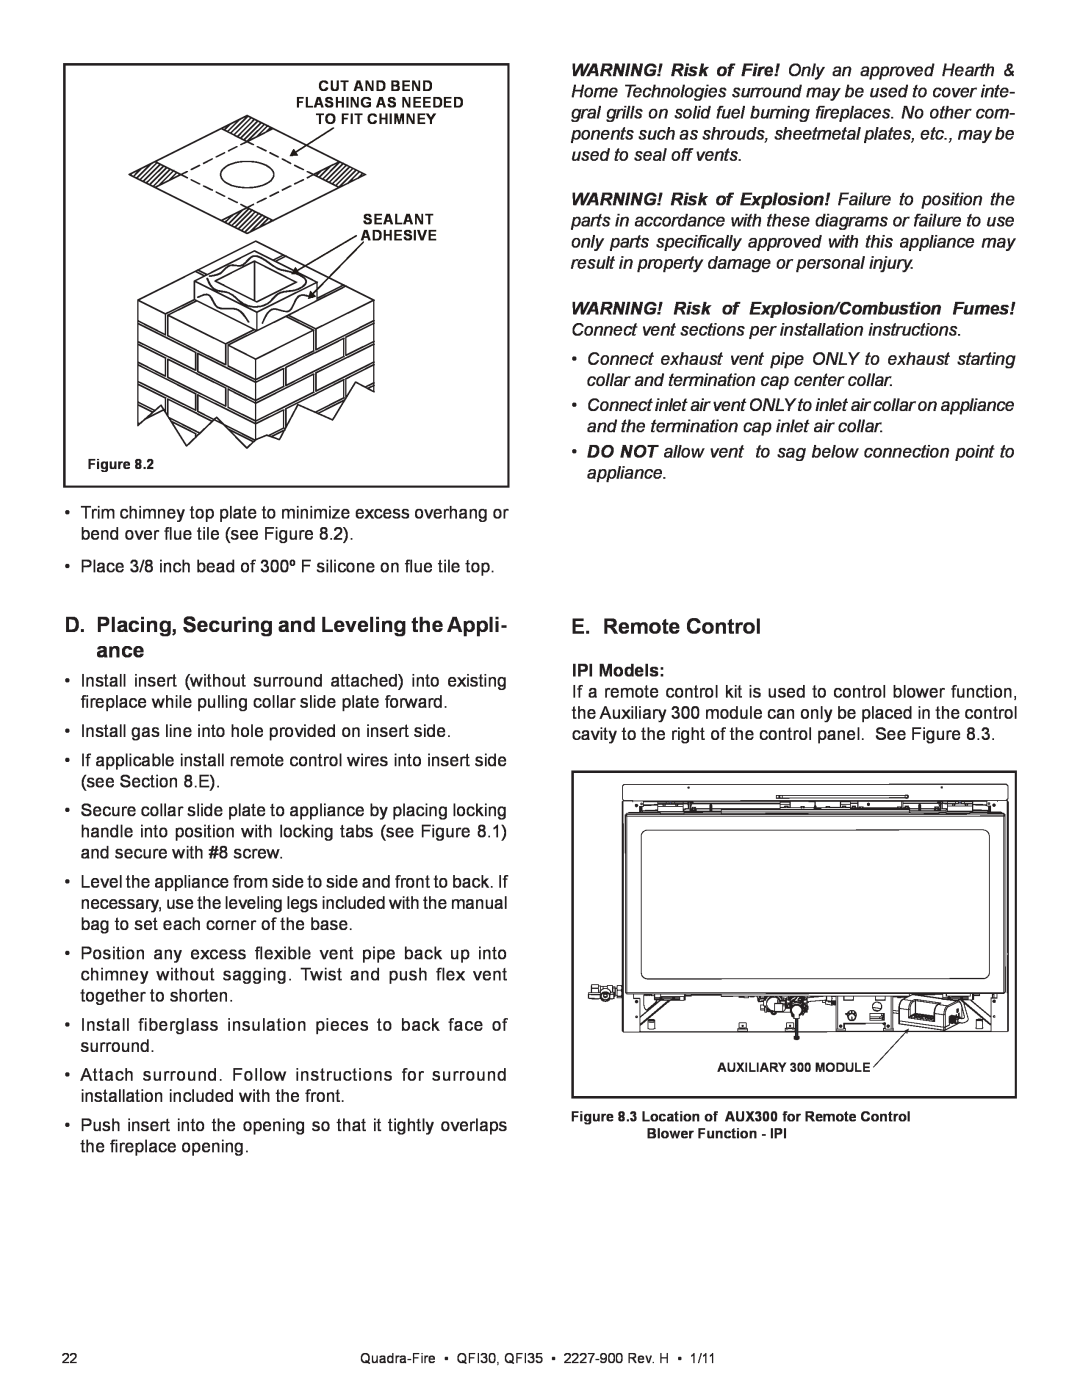 Quadra-Fire QF130 owner manual D.Placing, Securing and Leveling the Appli- ance, E. Remote Control, IPI Models 